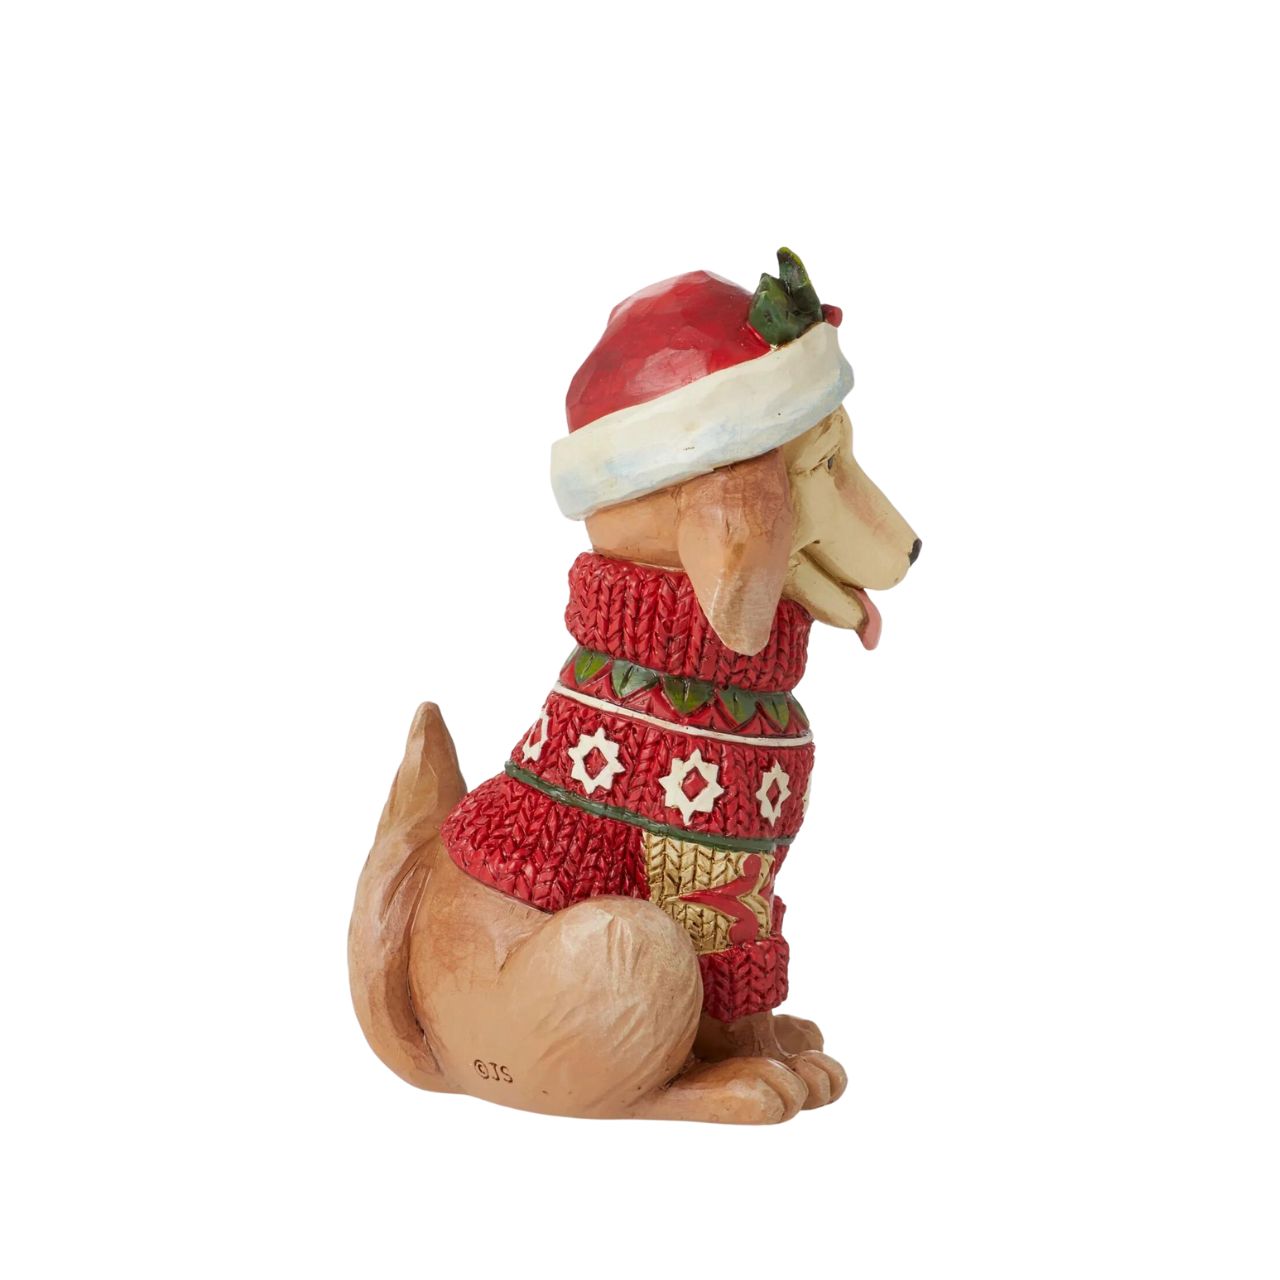 Heartwood Creek Festive Dog Mini Figurine  Designed by award winning artist Jim Shore as part of the Heartwood Creek Mini Figurine Collection, hand crafted using high quality cast stone and hand painted, this festive Dog is perfect for the Christmas season.